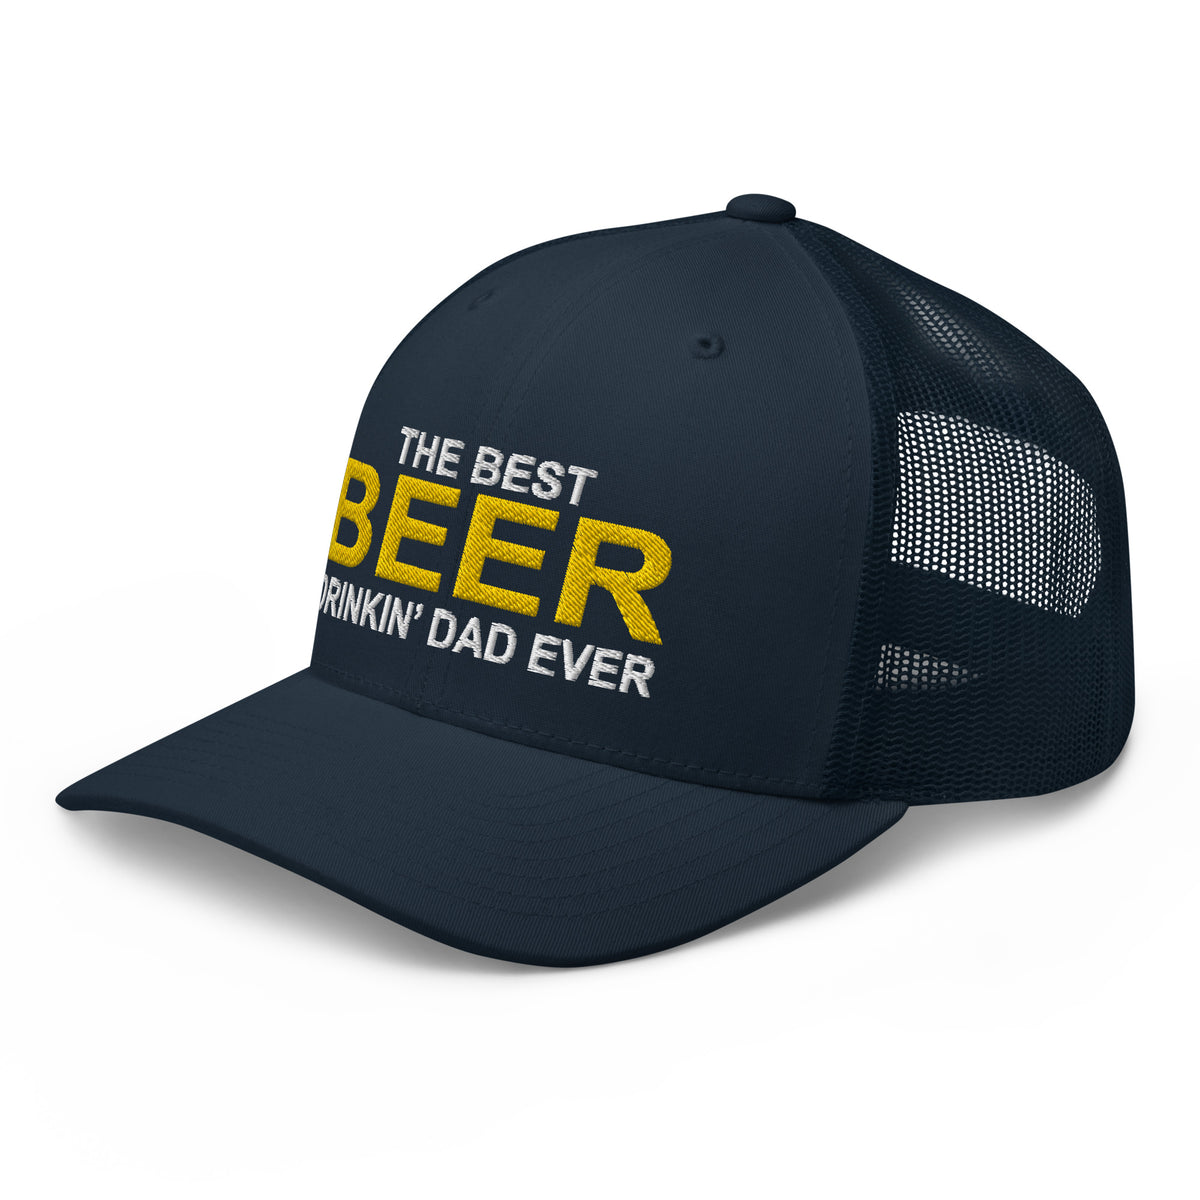 The Best Beer Drinkin' Dad Ever - Father's Day -  Embroidered Hat - Free Shipping